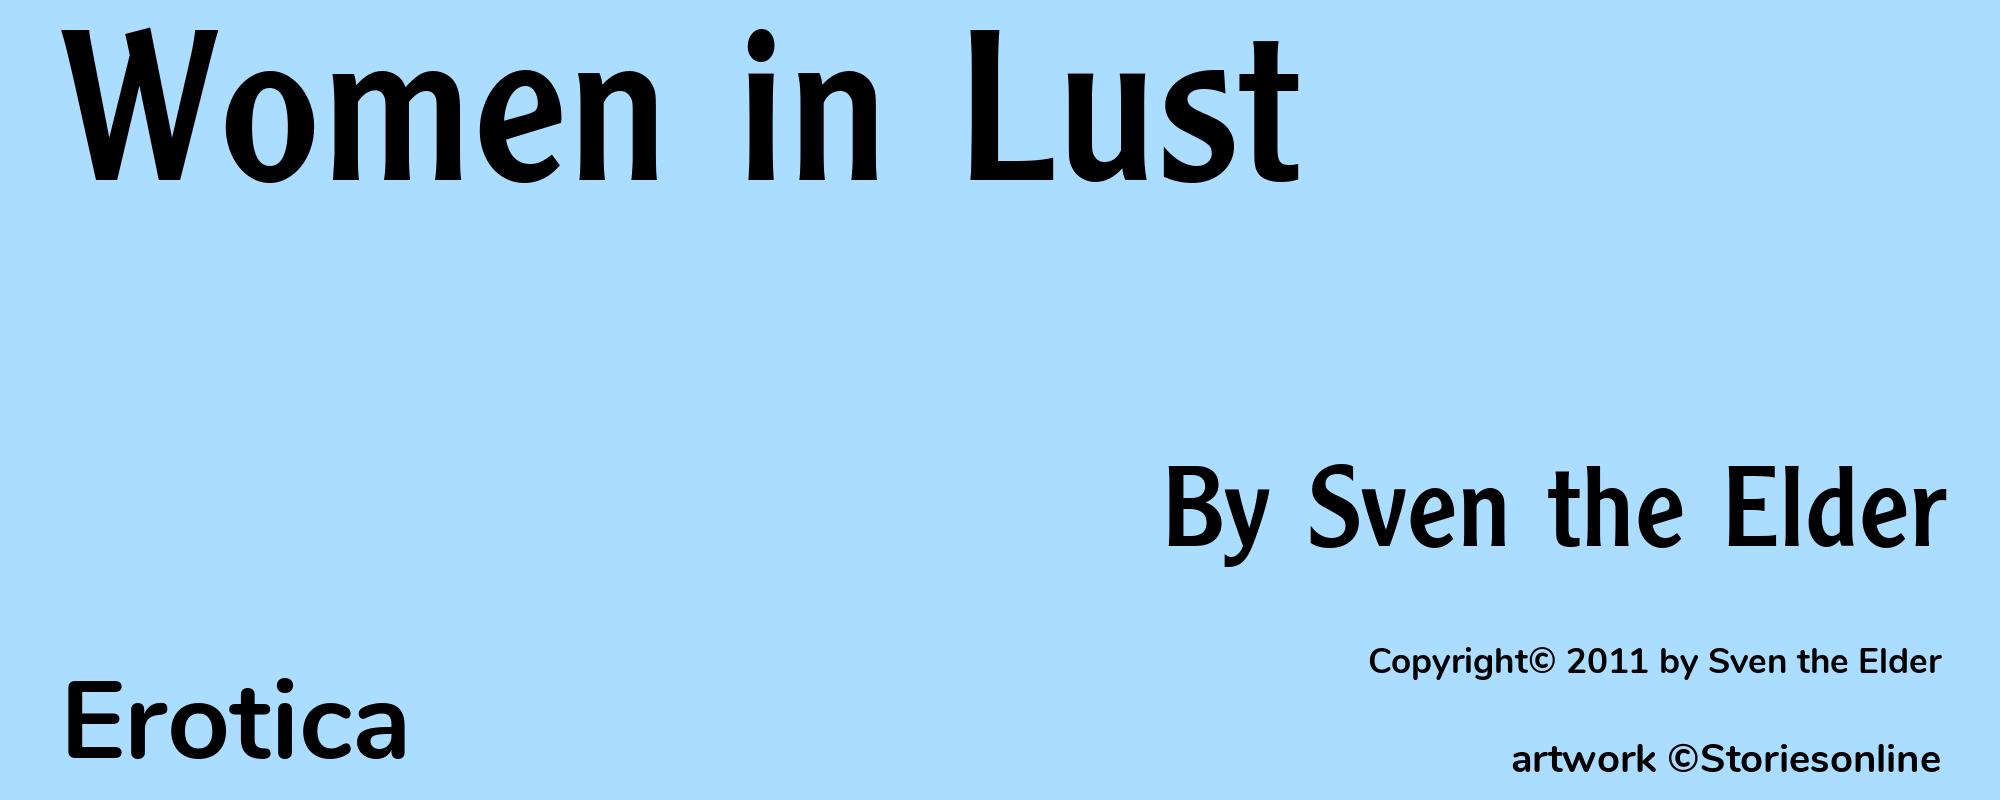 Women in Lust - Cover